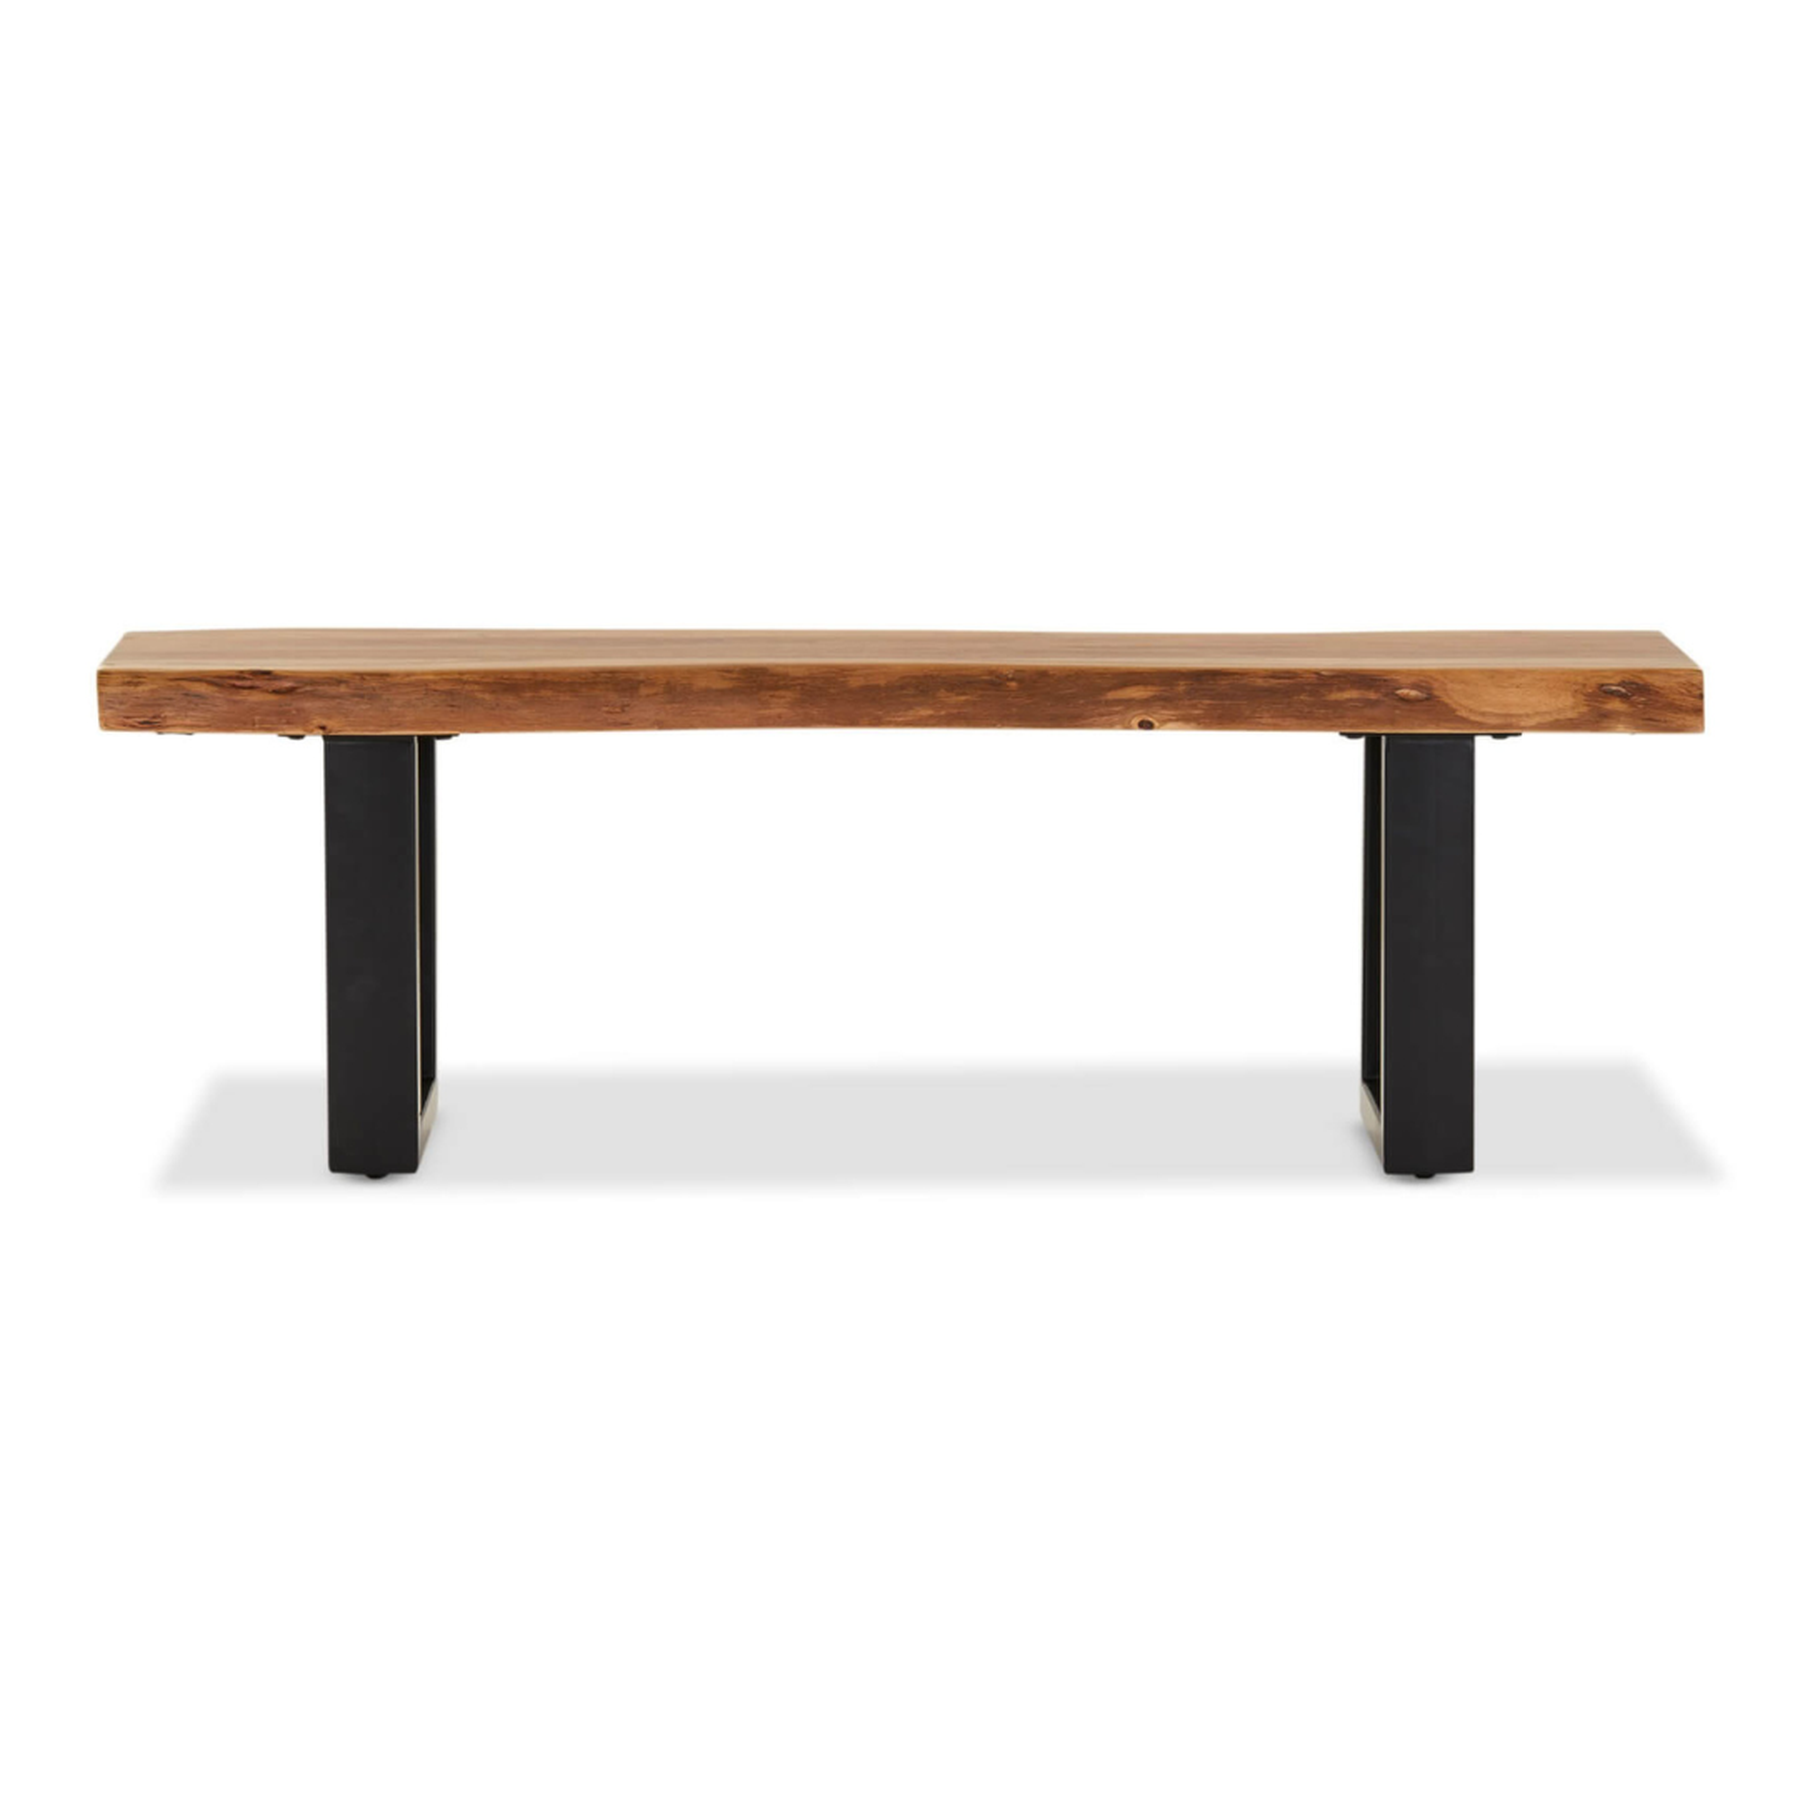 Live Edge Wooden Bench | Wood Chair with Black Iron Legs | 2 Sizes Available